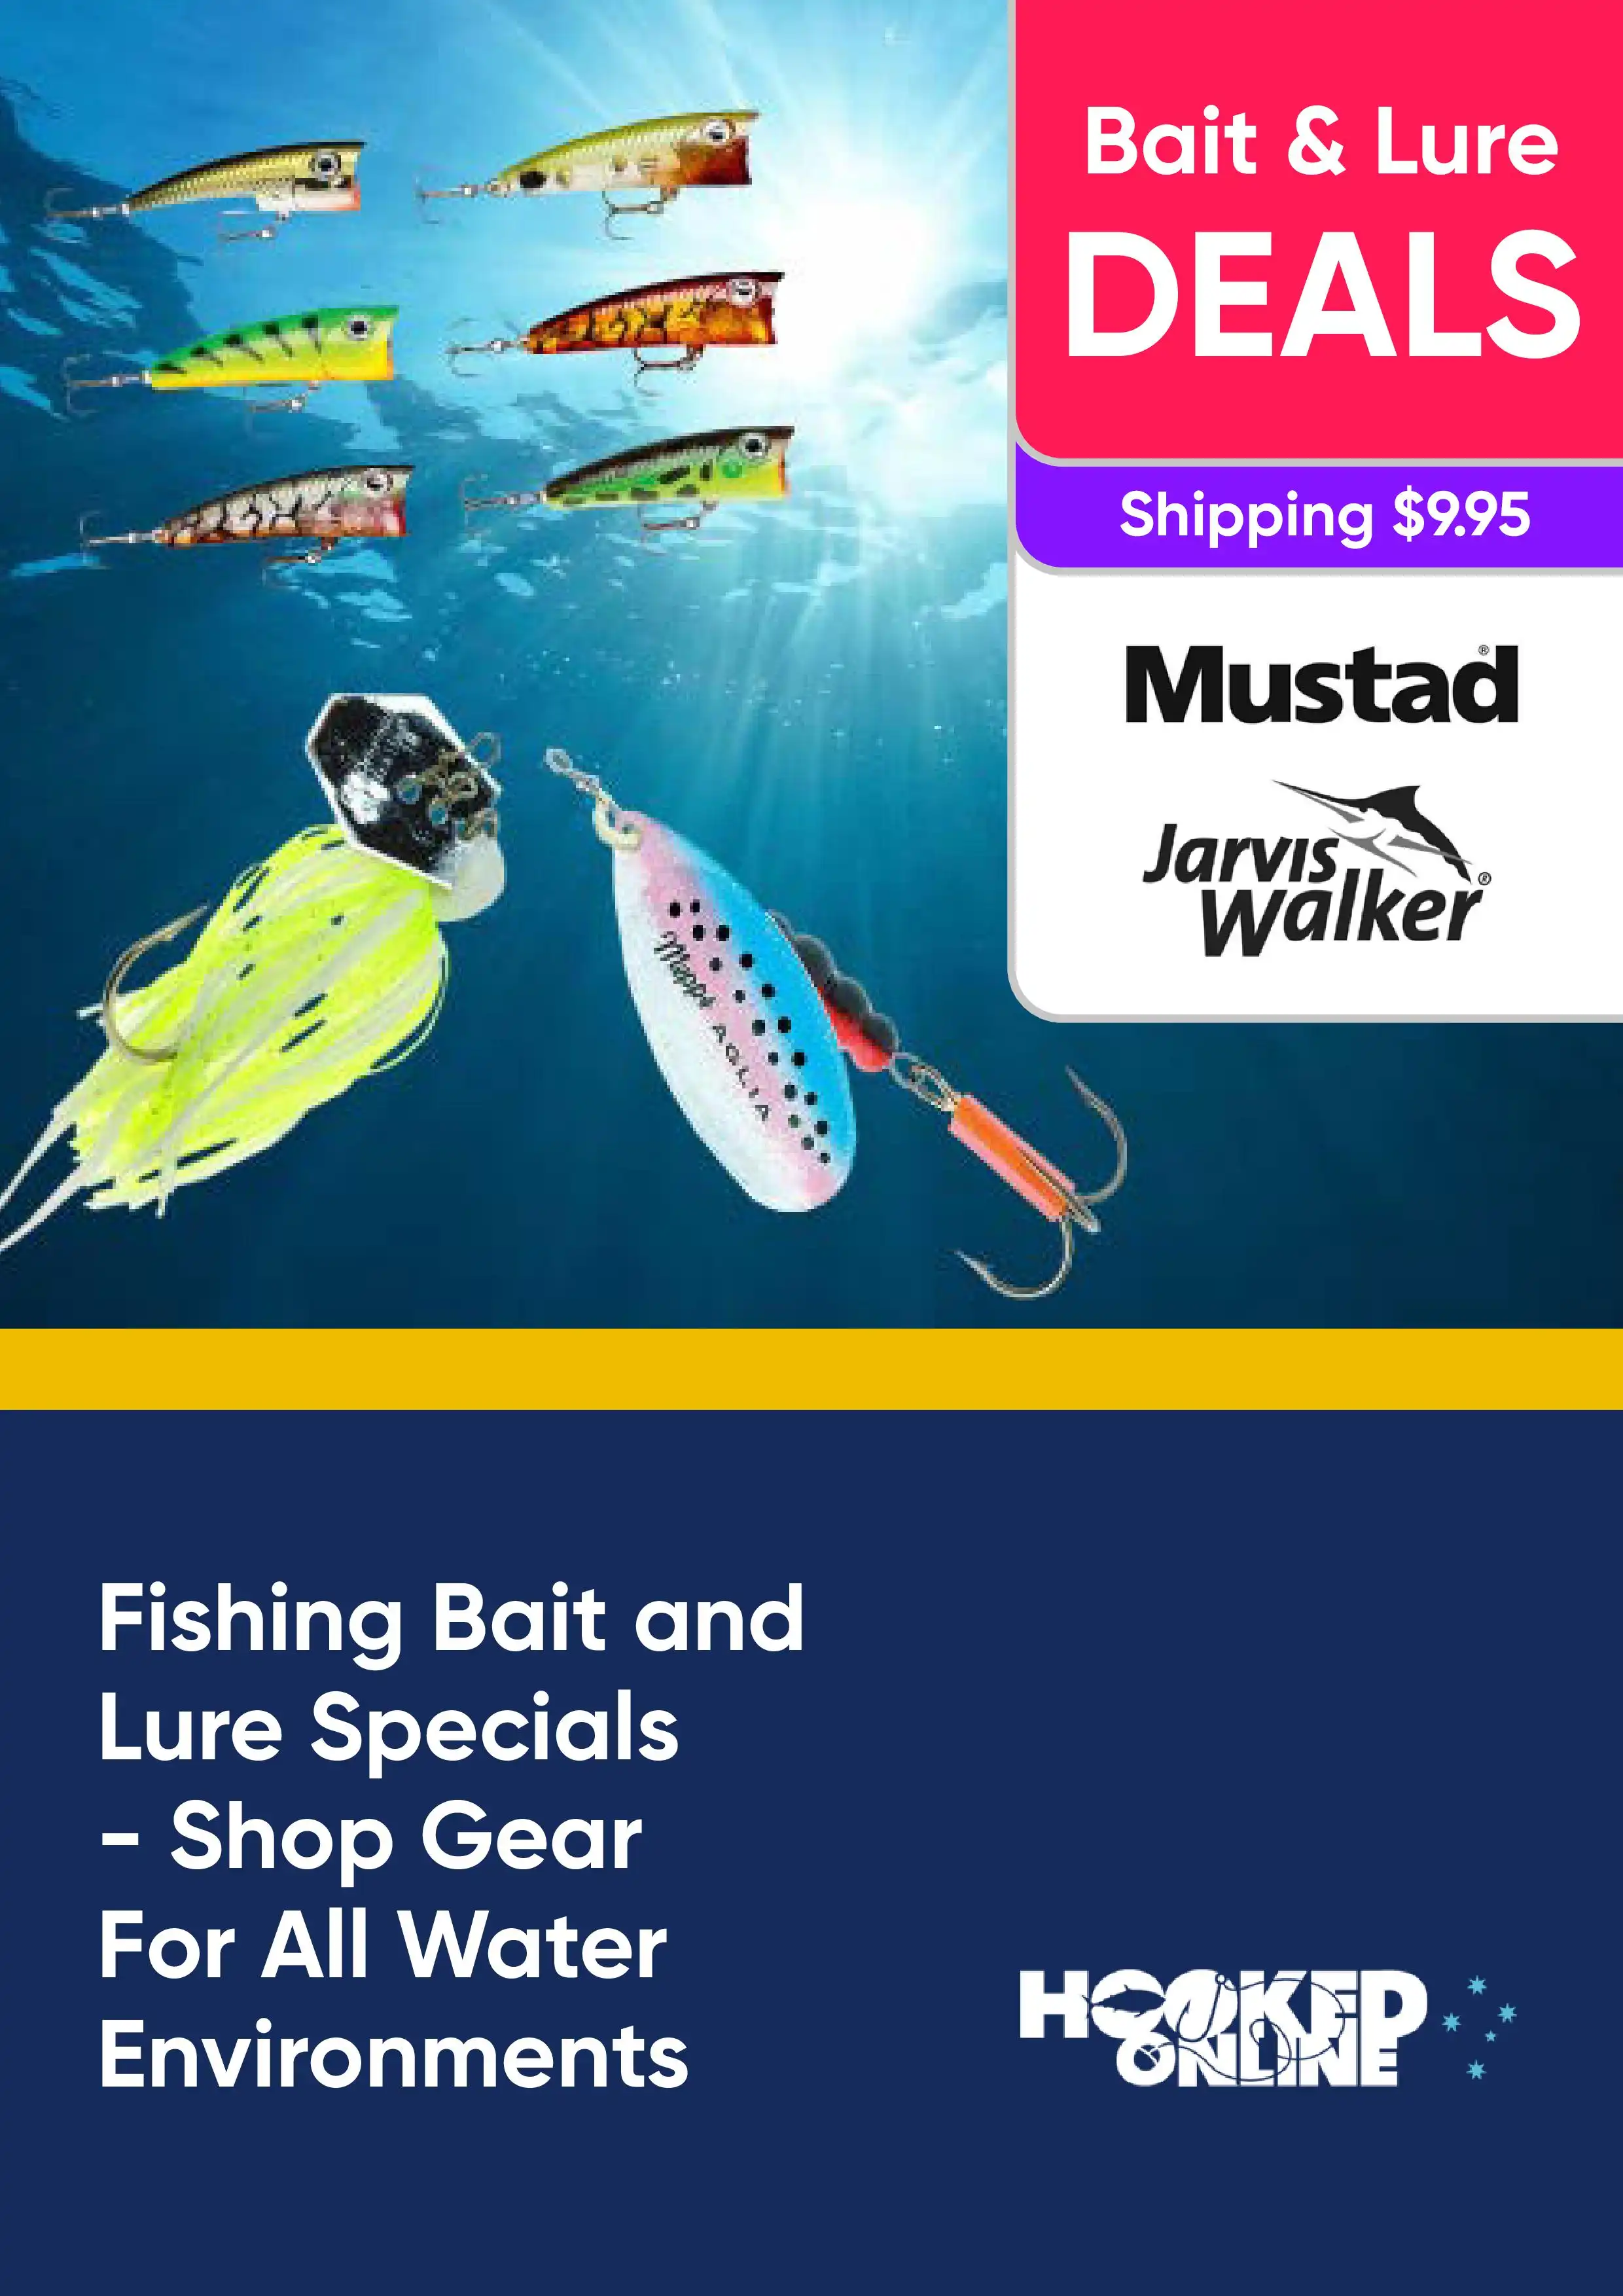 Fishing Bait and Lure Specials - Shop Gear For All Water Environments